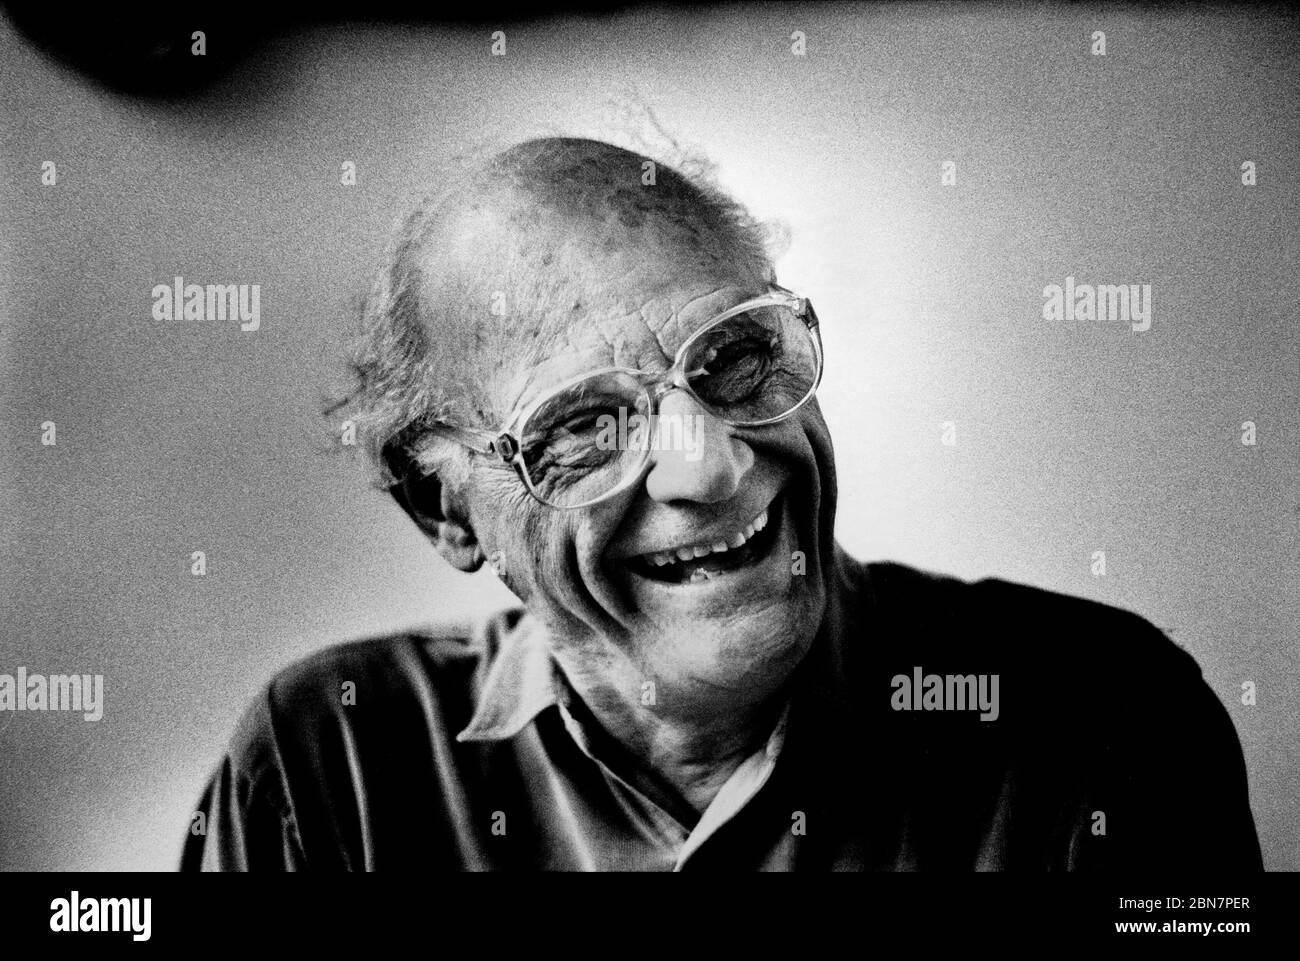 Arthur Miller, playright photographed in London in the early 1990's Arthur Asher Miller (October 17, 1915 – February 10, 2005) was an American playwright, essayist, blacklisted writer and controversial figure in the 20th-century American theater. Among his most popular plays are All My Sons (1947), Death of a Salesman (1949), The Crucible (1953), and A View from the Bridge (1955, revised 1956). He wrote several screenplays and was most noted for his work on The Misfits (1961). The drama Death of a Salesman has been numbered on the short list of finest American plays in the 20th century. Stock Photo